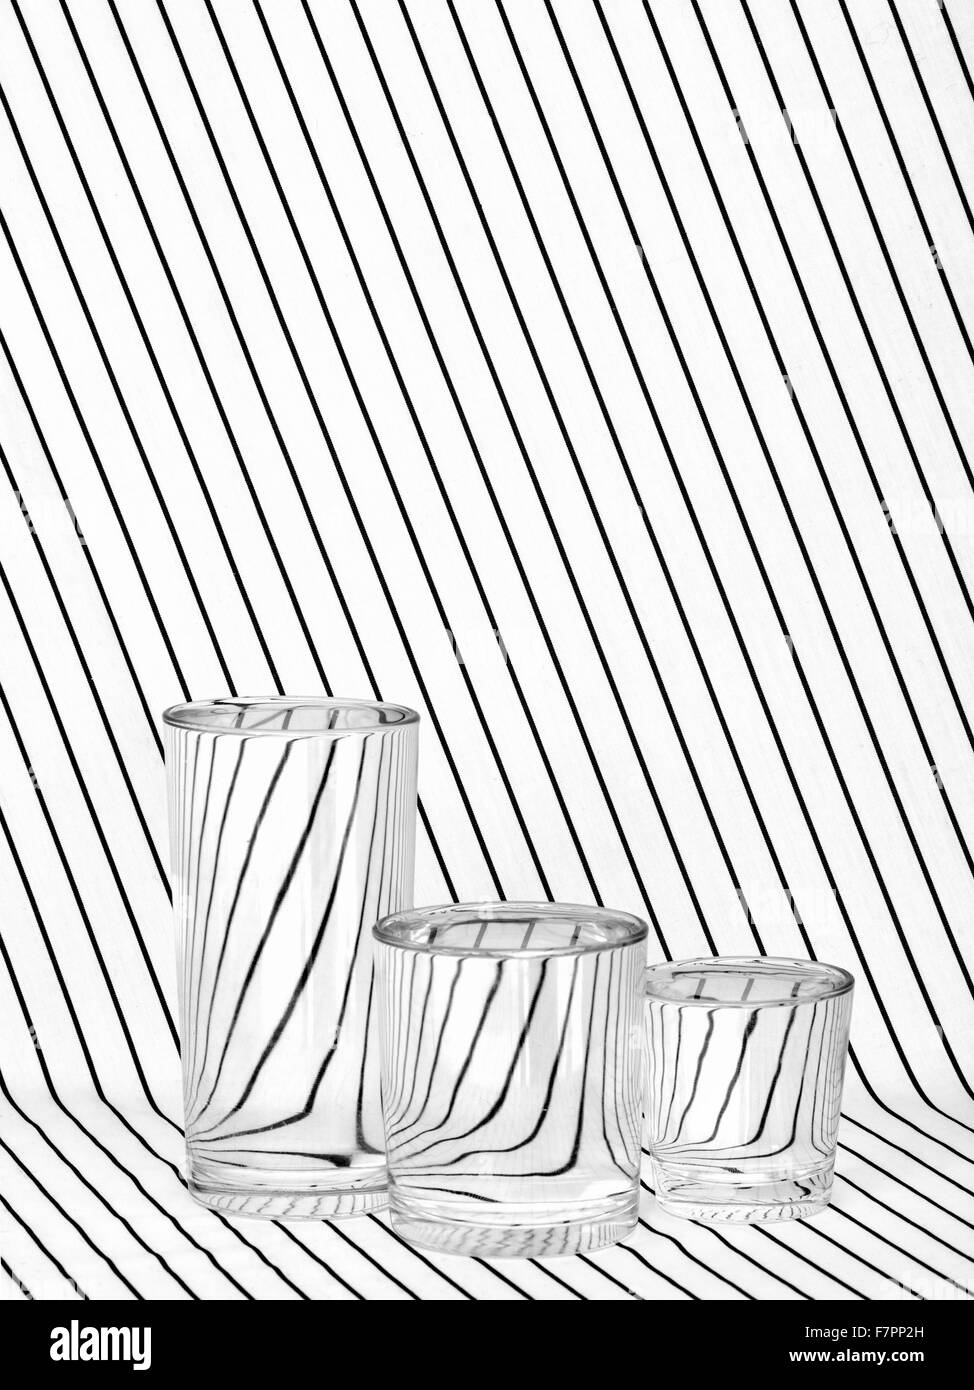 Three full glasses on striped fabric, black and white. Refraction. Stock Photo